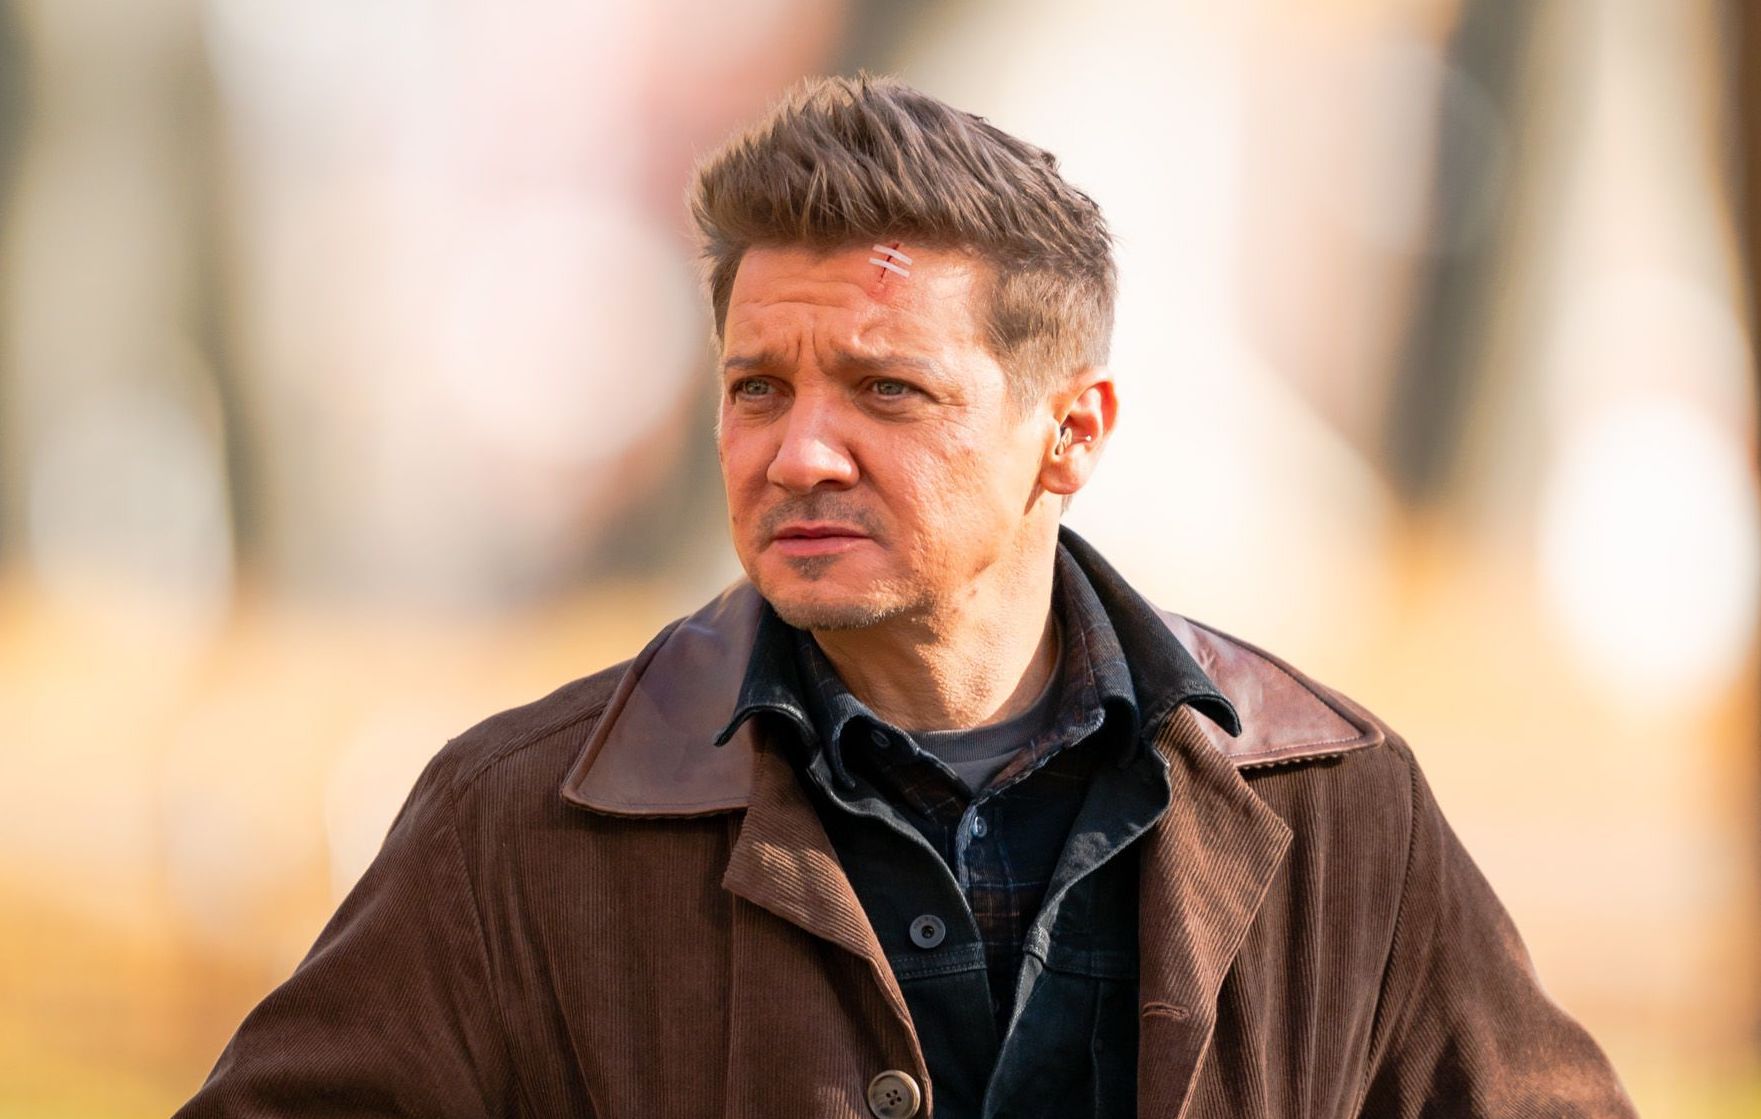 Jeremy Renner Quits ‘Mission: Impossible’ to Prioritize Fatherhood